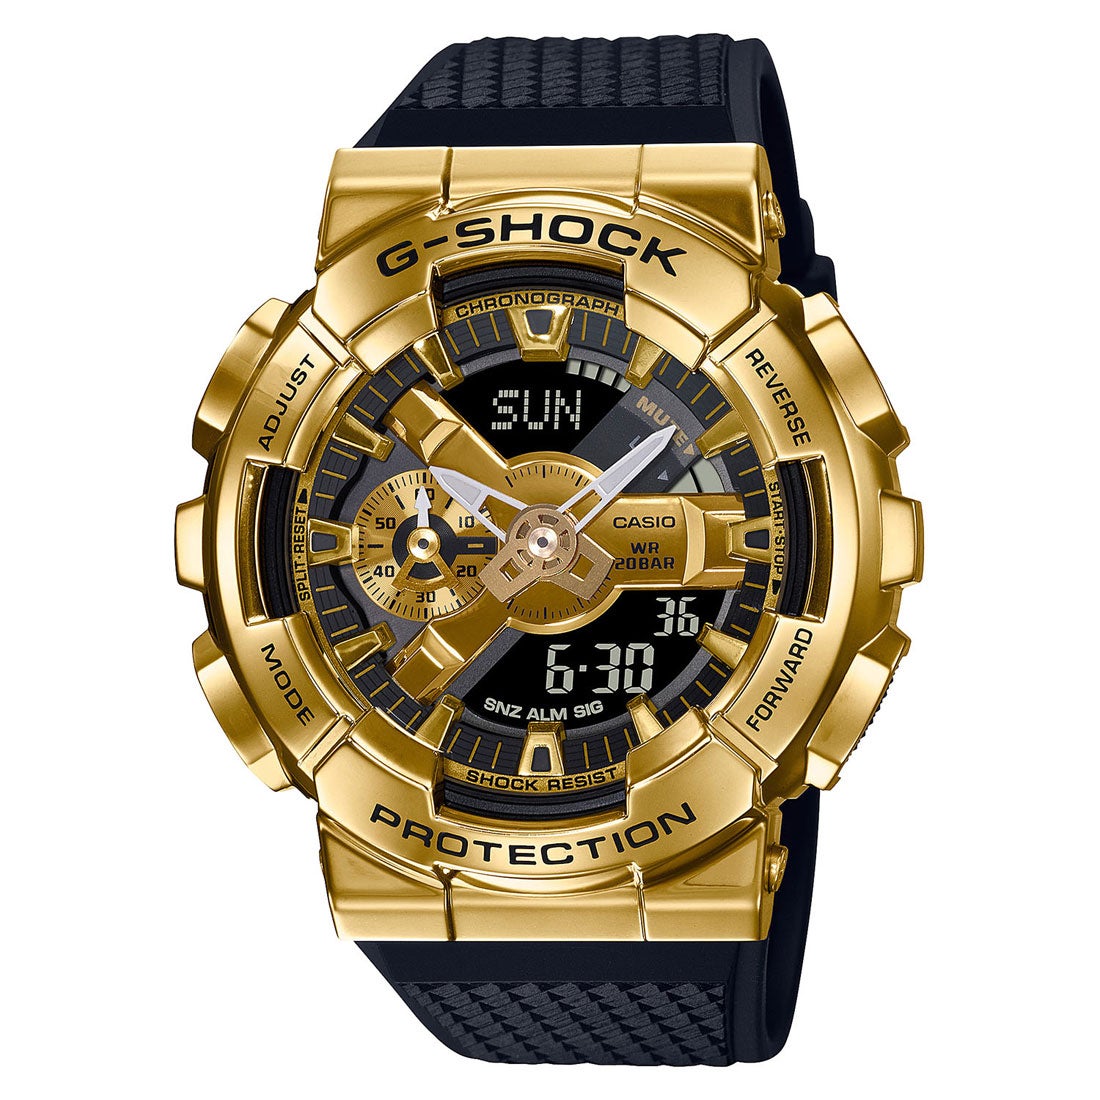 G-SHOCK】GM-110シリーズ / Metal Coveredライン / GM-110G-1A9JF ...